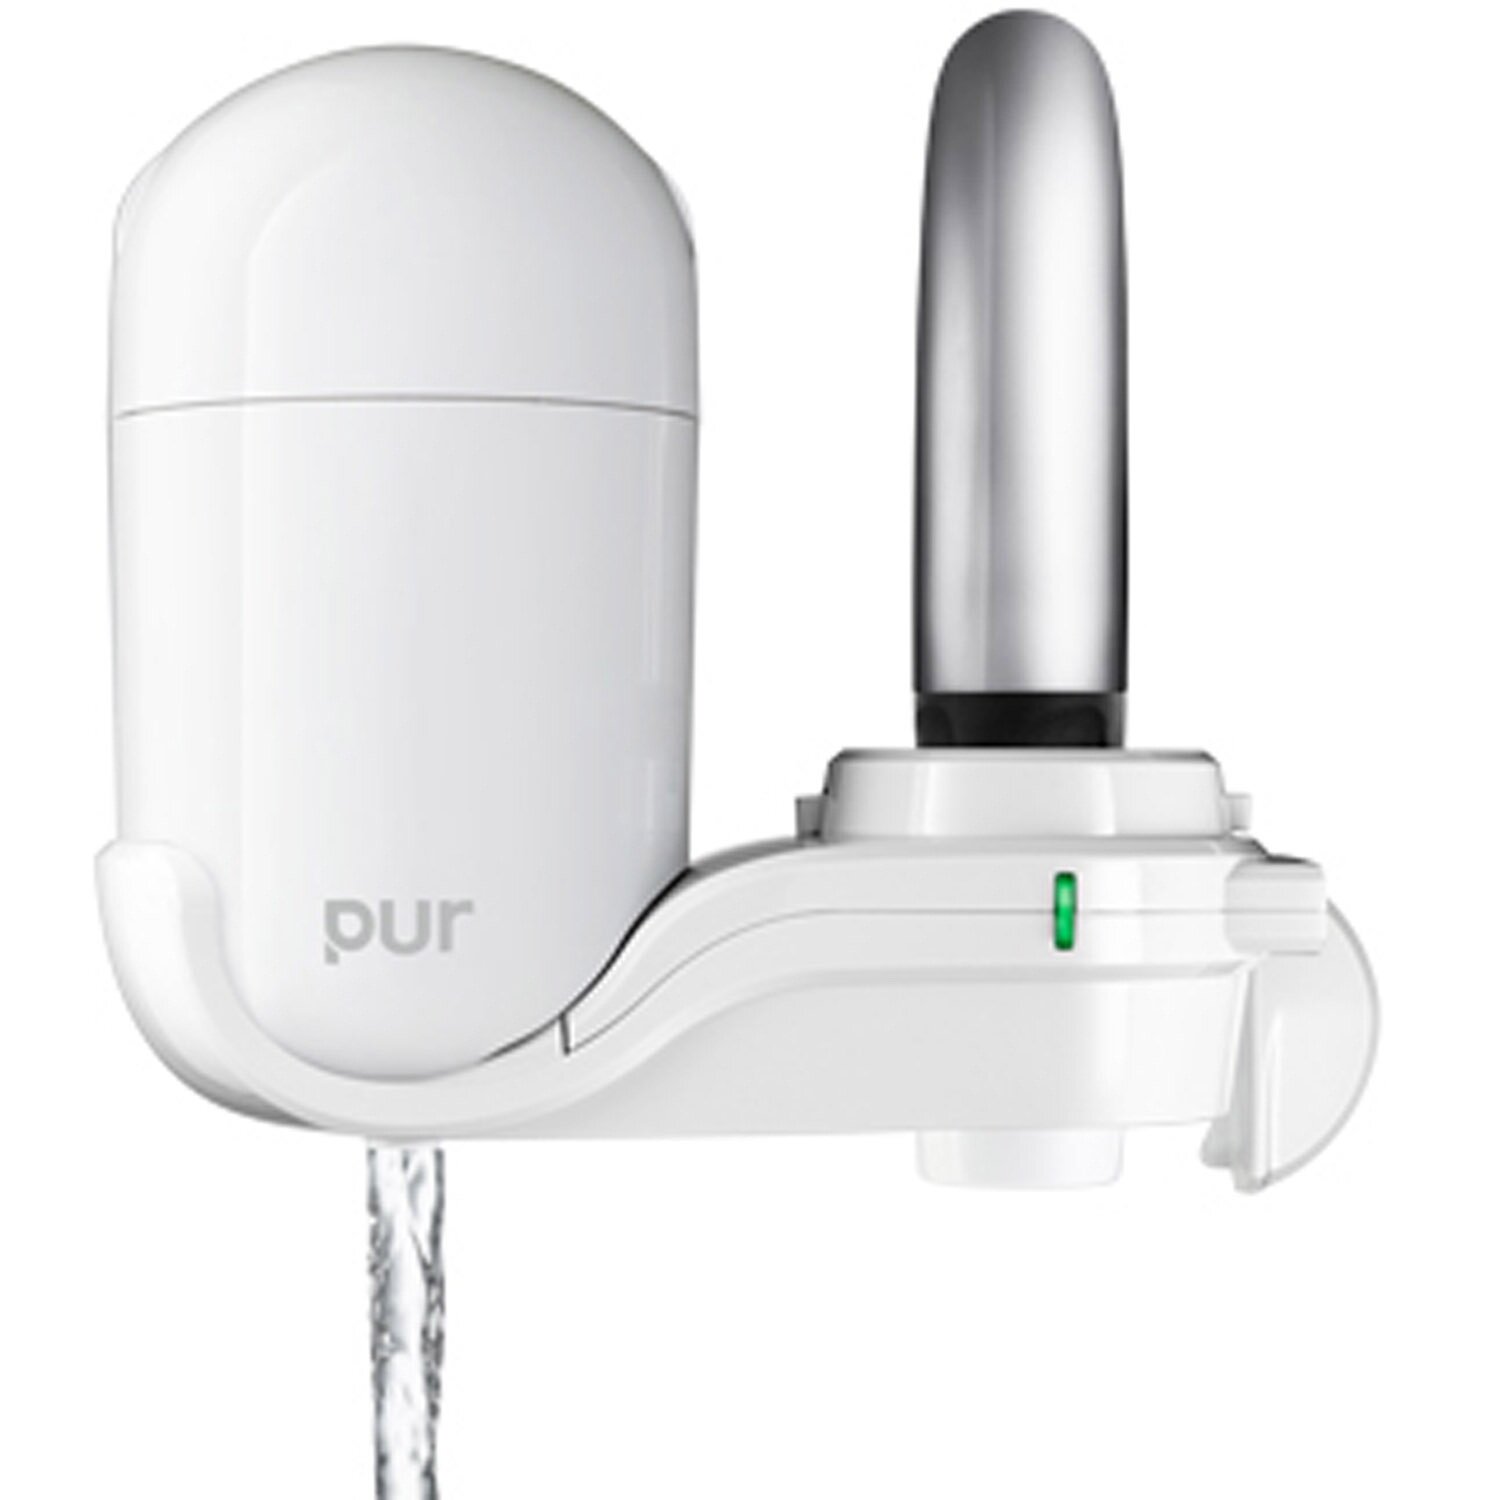 Pur Two Stage Vertical Faucet Mount Filter Reviews Wayfair